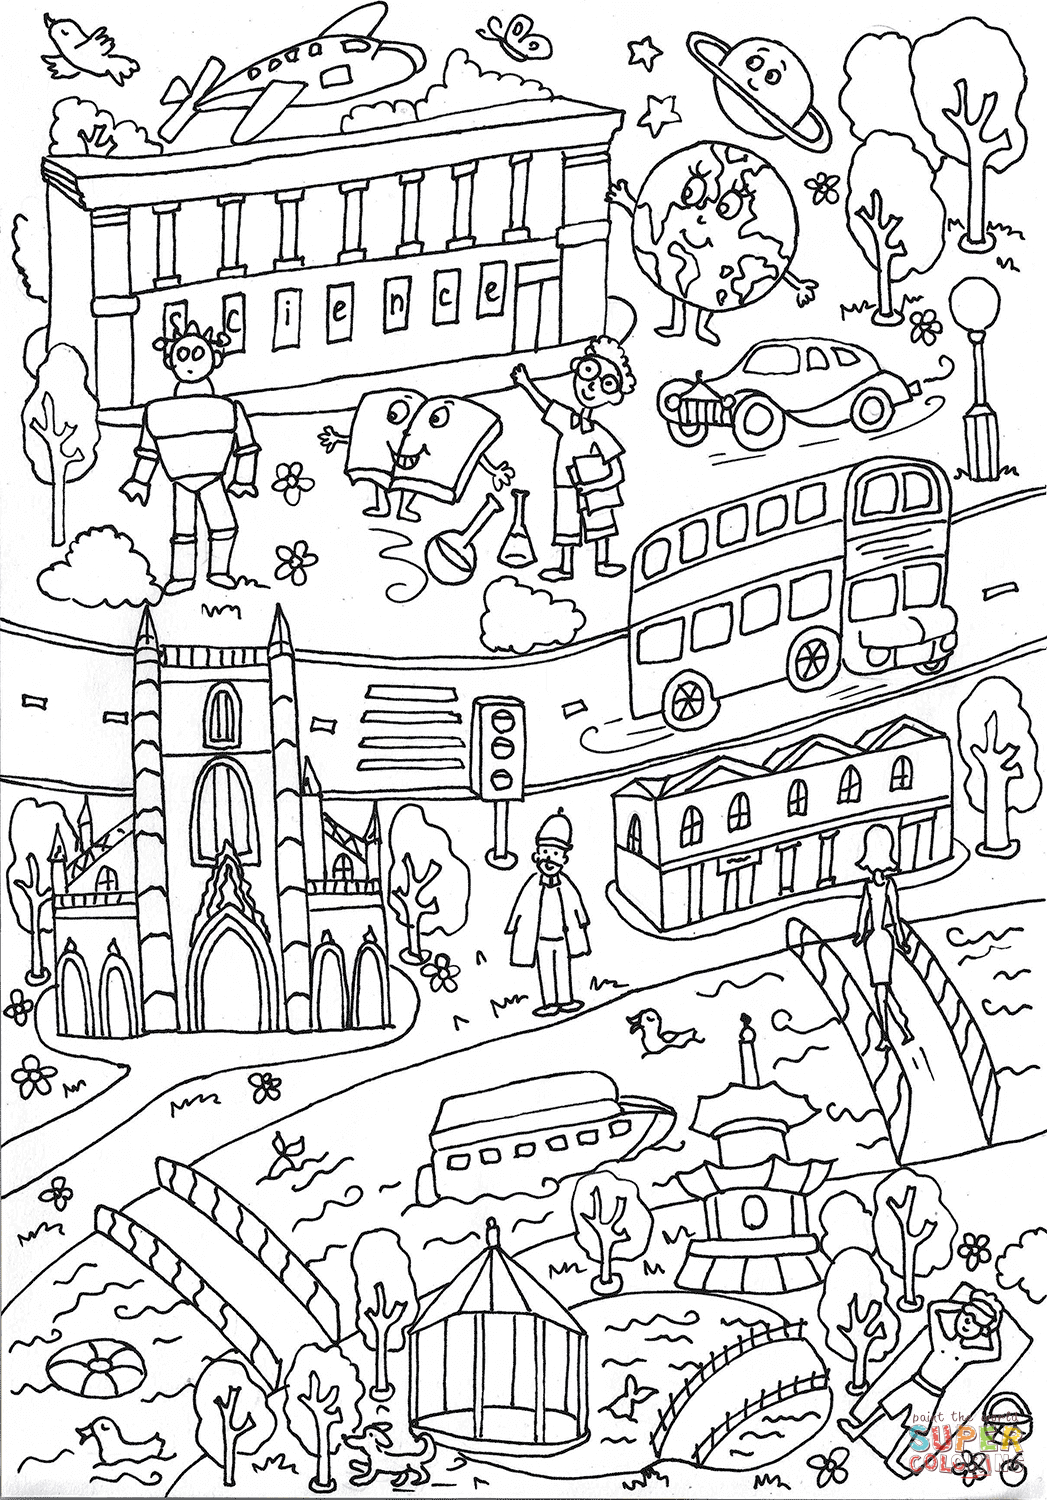 Science Museum And Battersea Park Coloring Page | Free Printable - Free Printable South Park Coloring Pages